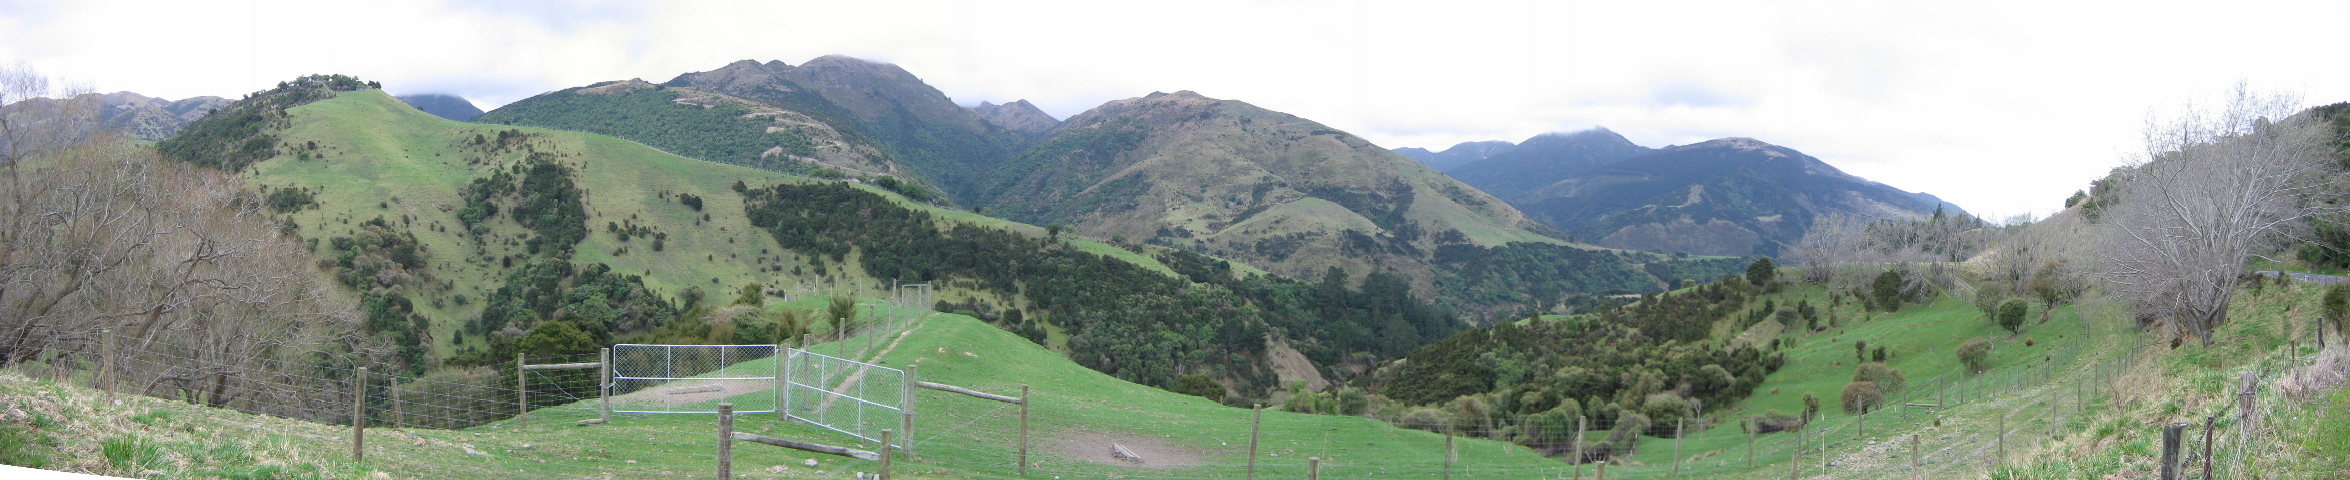 North of Christchurch, driving to Kaikoura